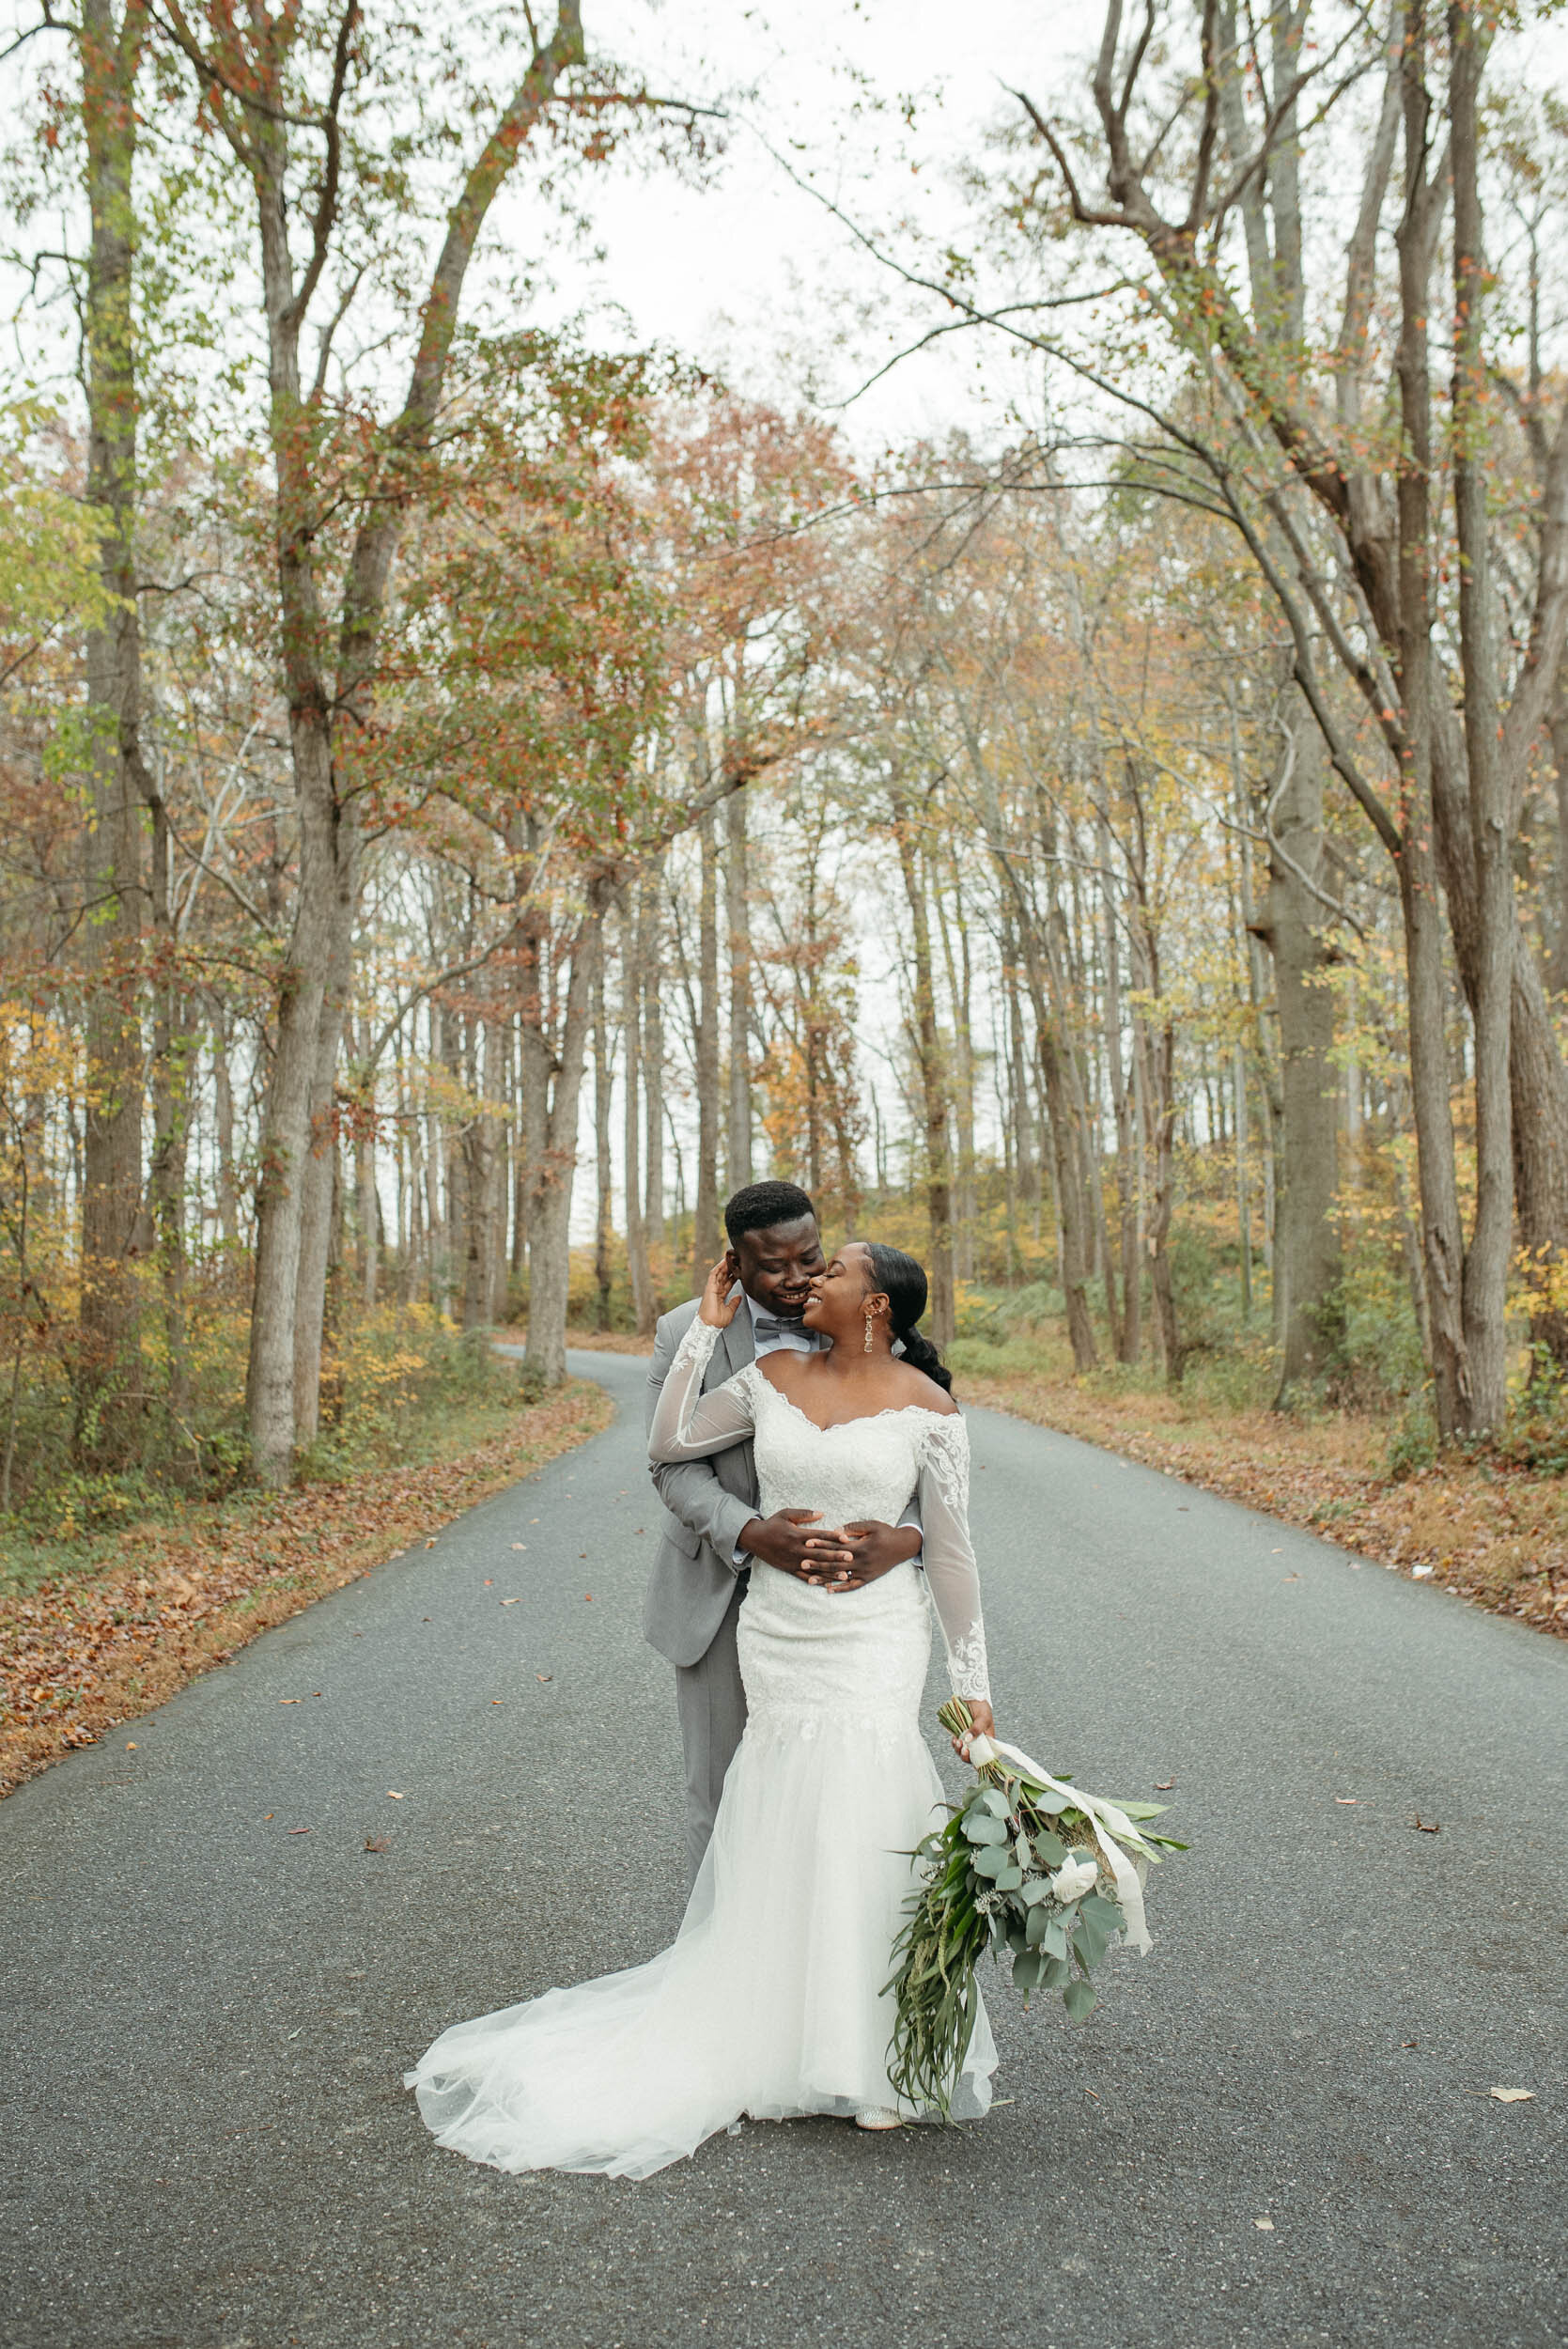 LIZRACHELPHOTO-DCWEDDINGPHOTOGRAPHER-BIPOCC-INCLUSIVE-DAY-AFTER-MONTGOMERY-COUNTY-SESSION-15.jpg